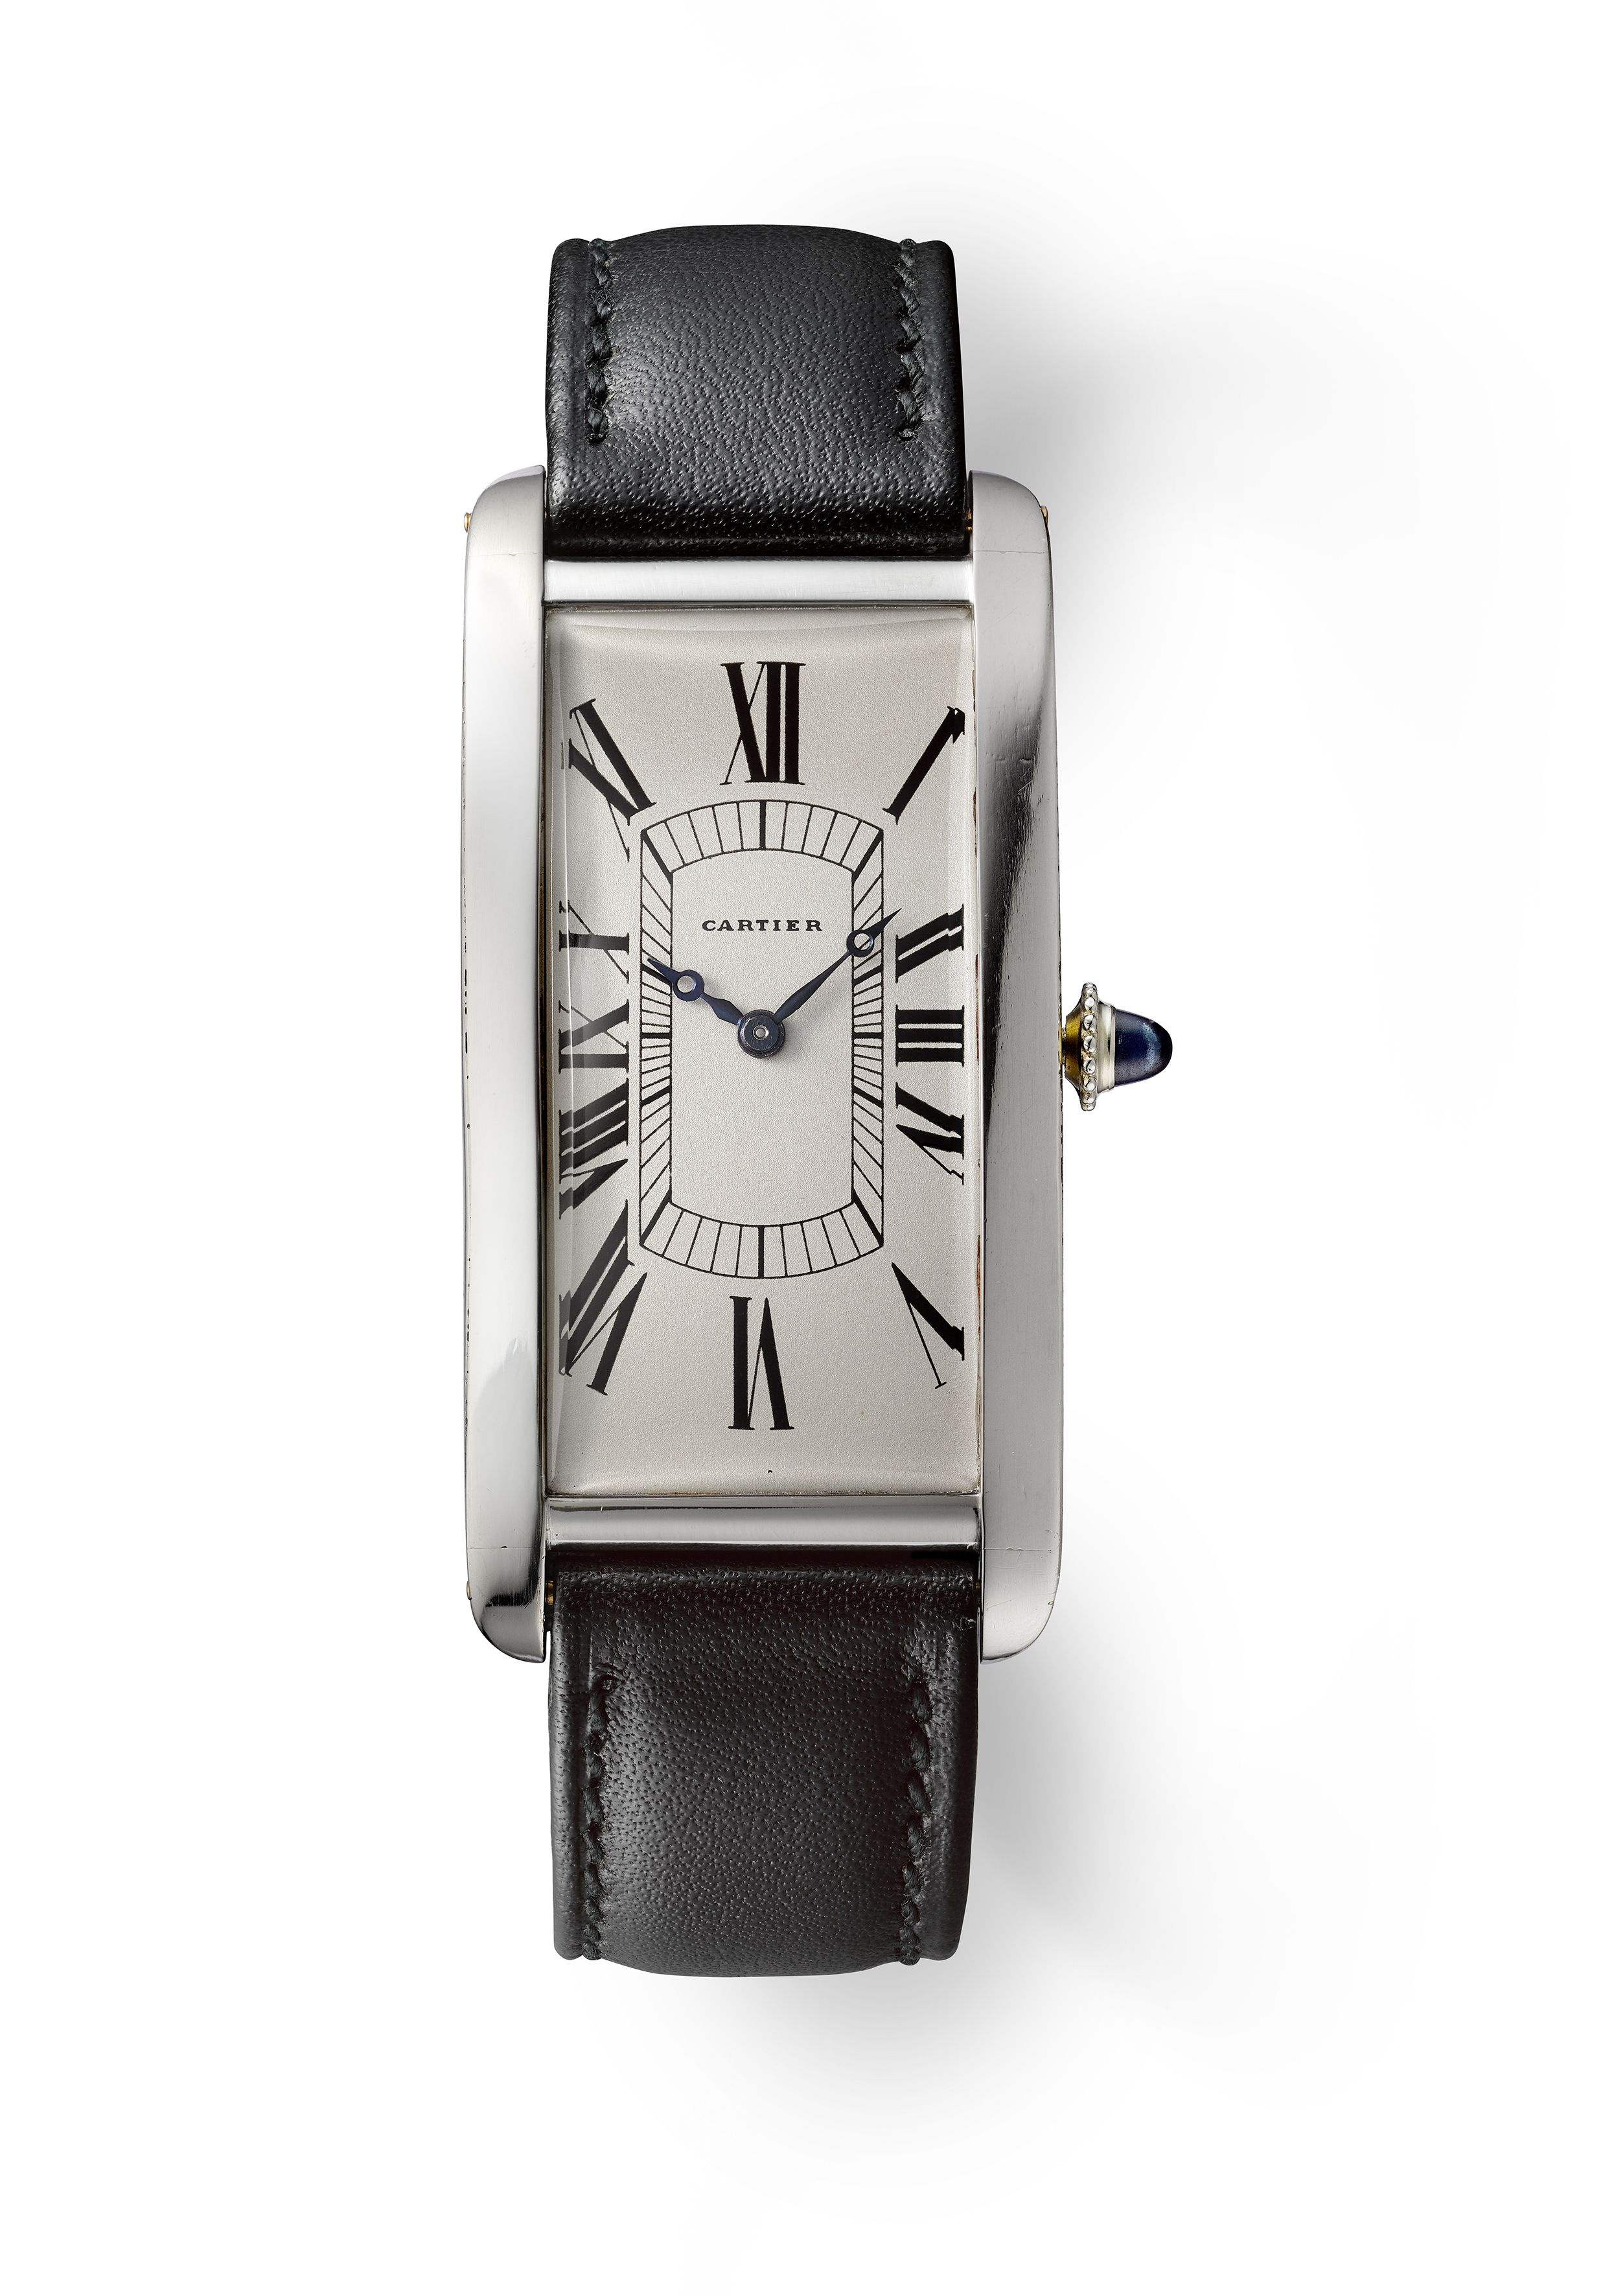 Kapoor Watch on X: Louis #Cartier, drew inspiration from the Renault Tank  in 1917 during the 1st World War for Tank Louis watch. This Cartier watch  for women features a rose gold